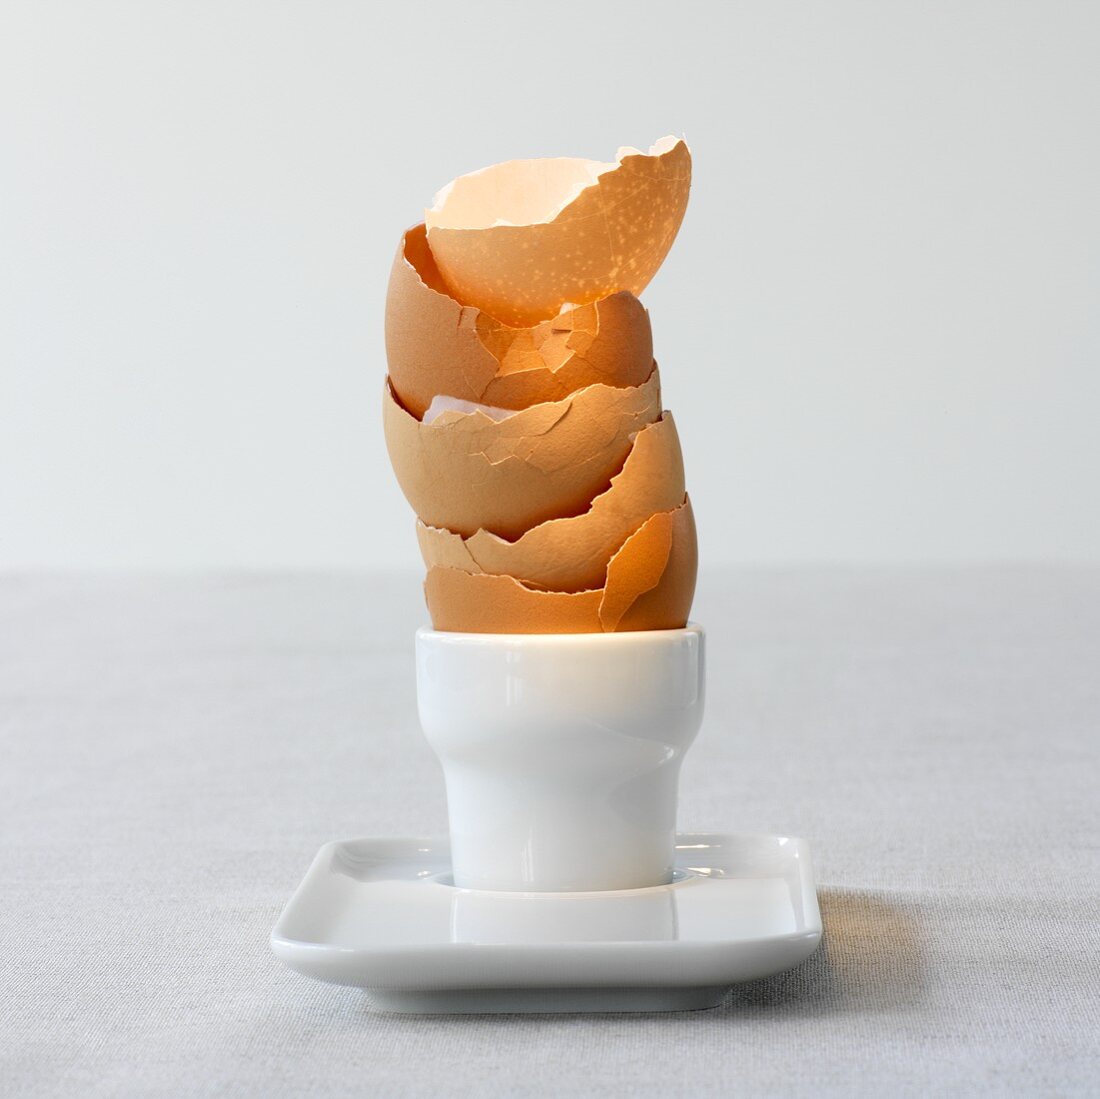 Egg shells stacked in an egg cup